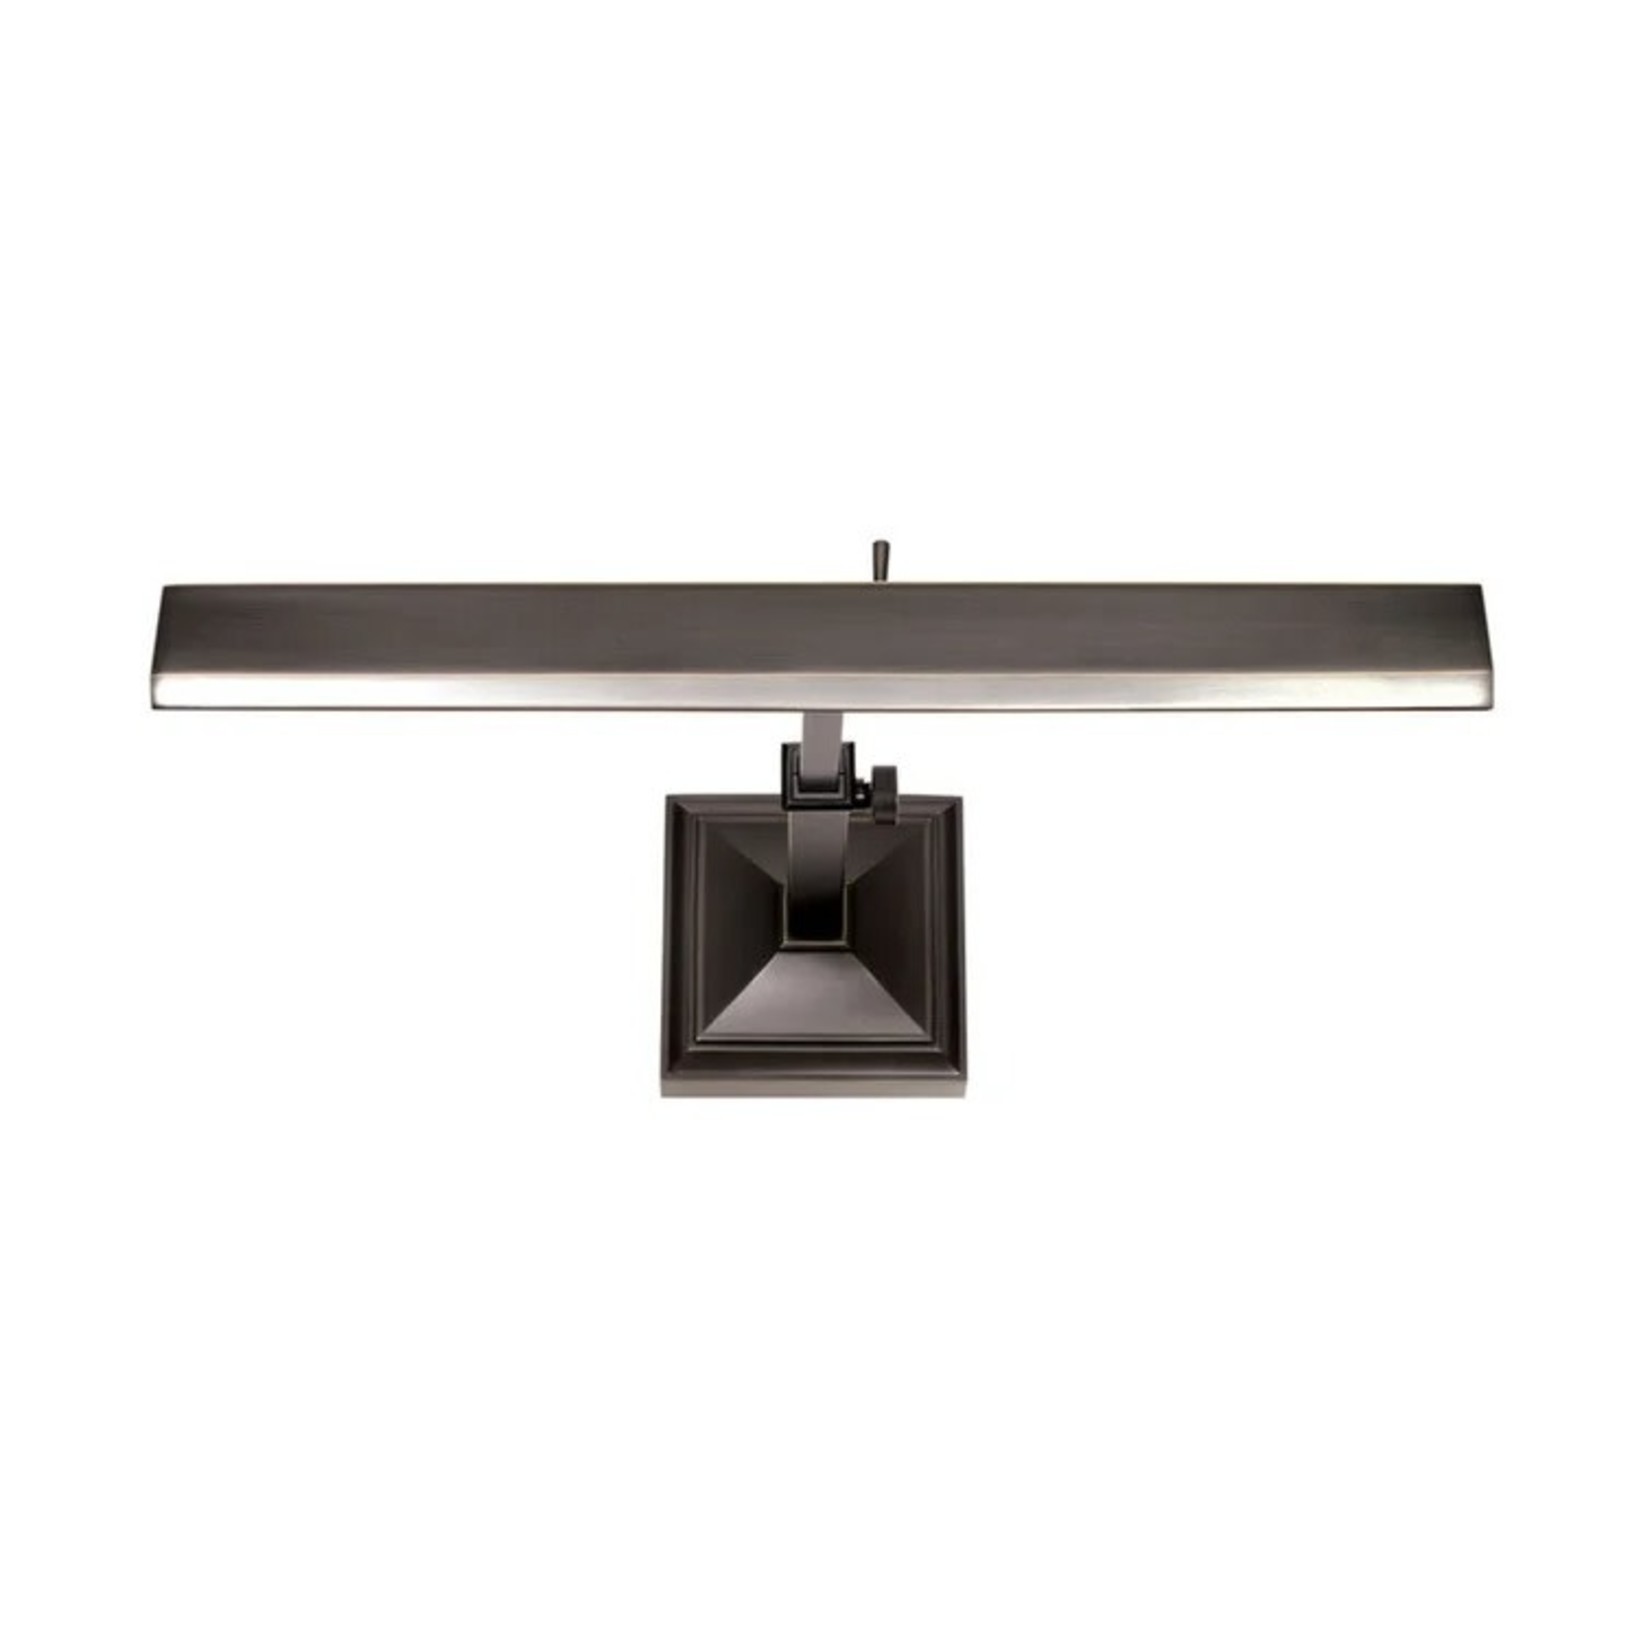 *27.75"Hemmingway Hardwired LED Wall Mounted Picture Light - Rubbed Bronze